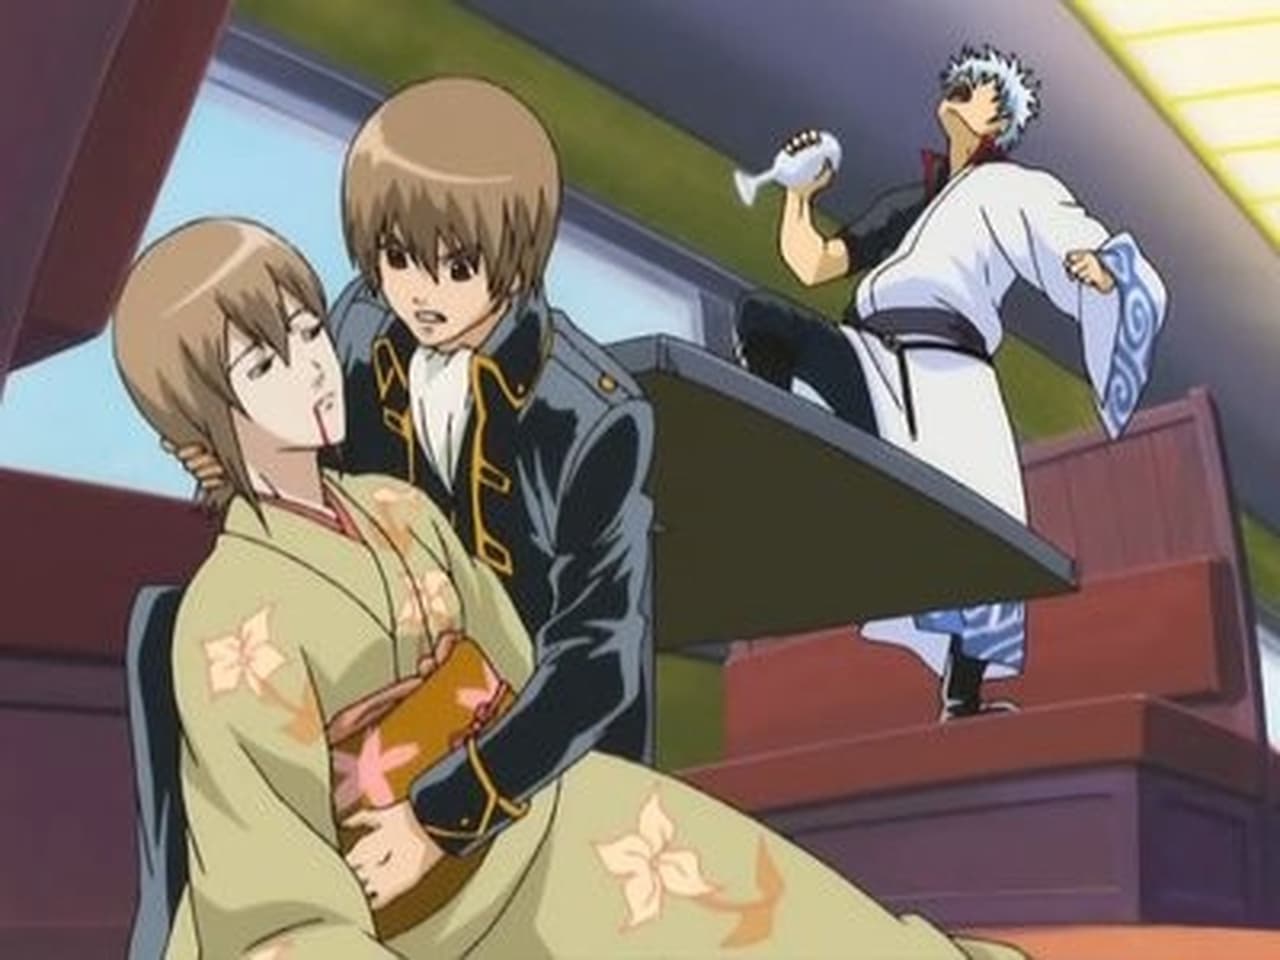 Gintama - Season 2 Episode 37 : It's Often Difficult to Sleep When You're Engrossed With Counting Sheep